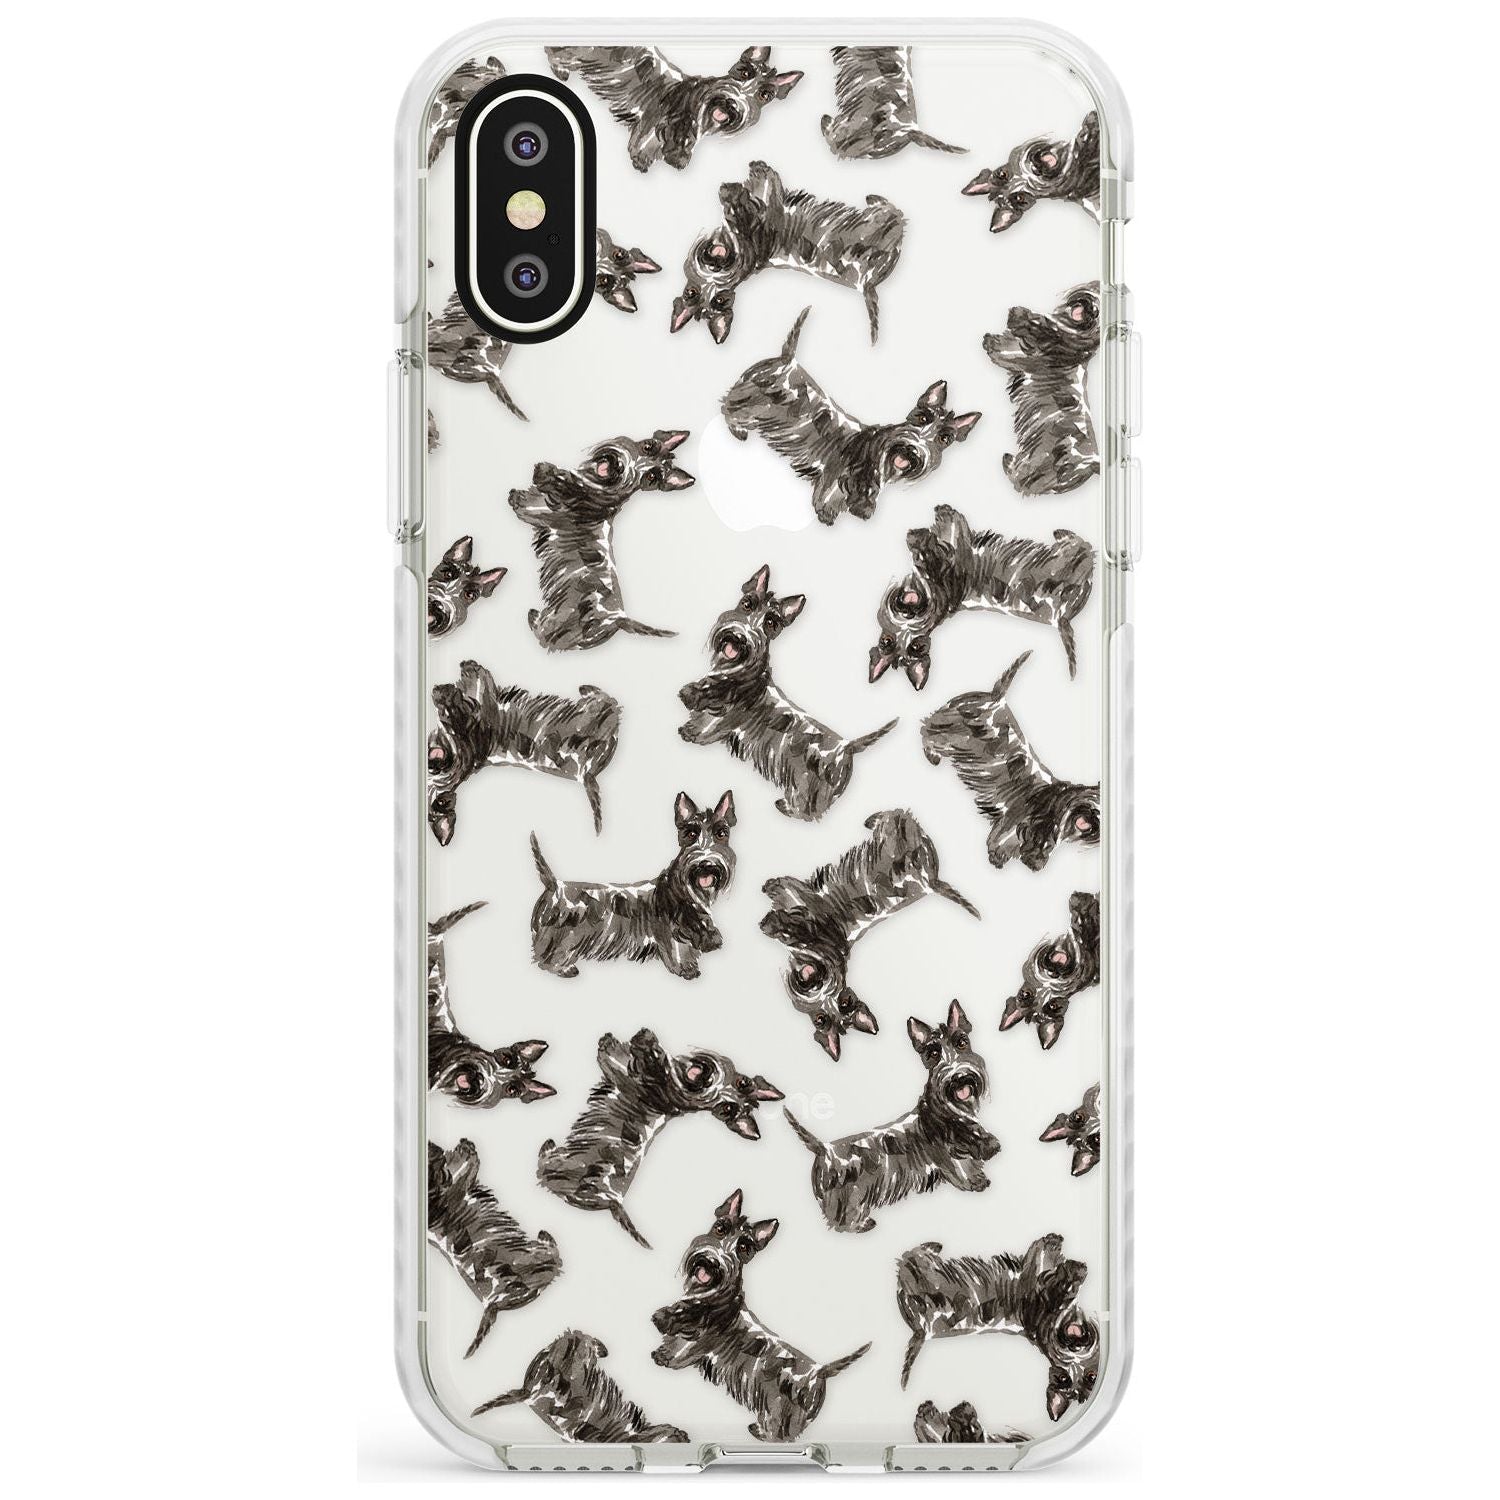 Scottish Terrier Watercolour Dog Pattern Impact Phone Case for iPhone X XS Max XR